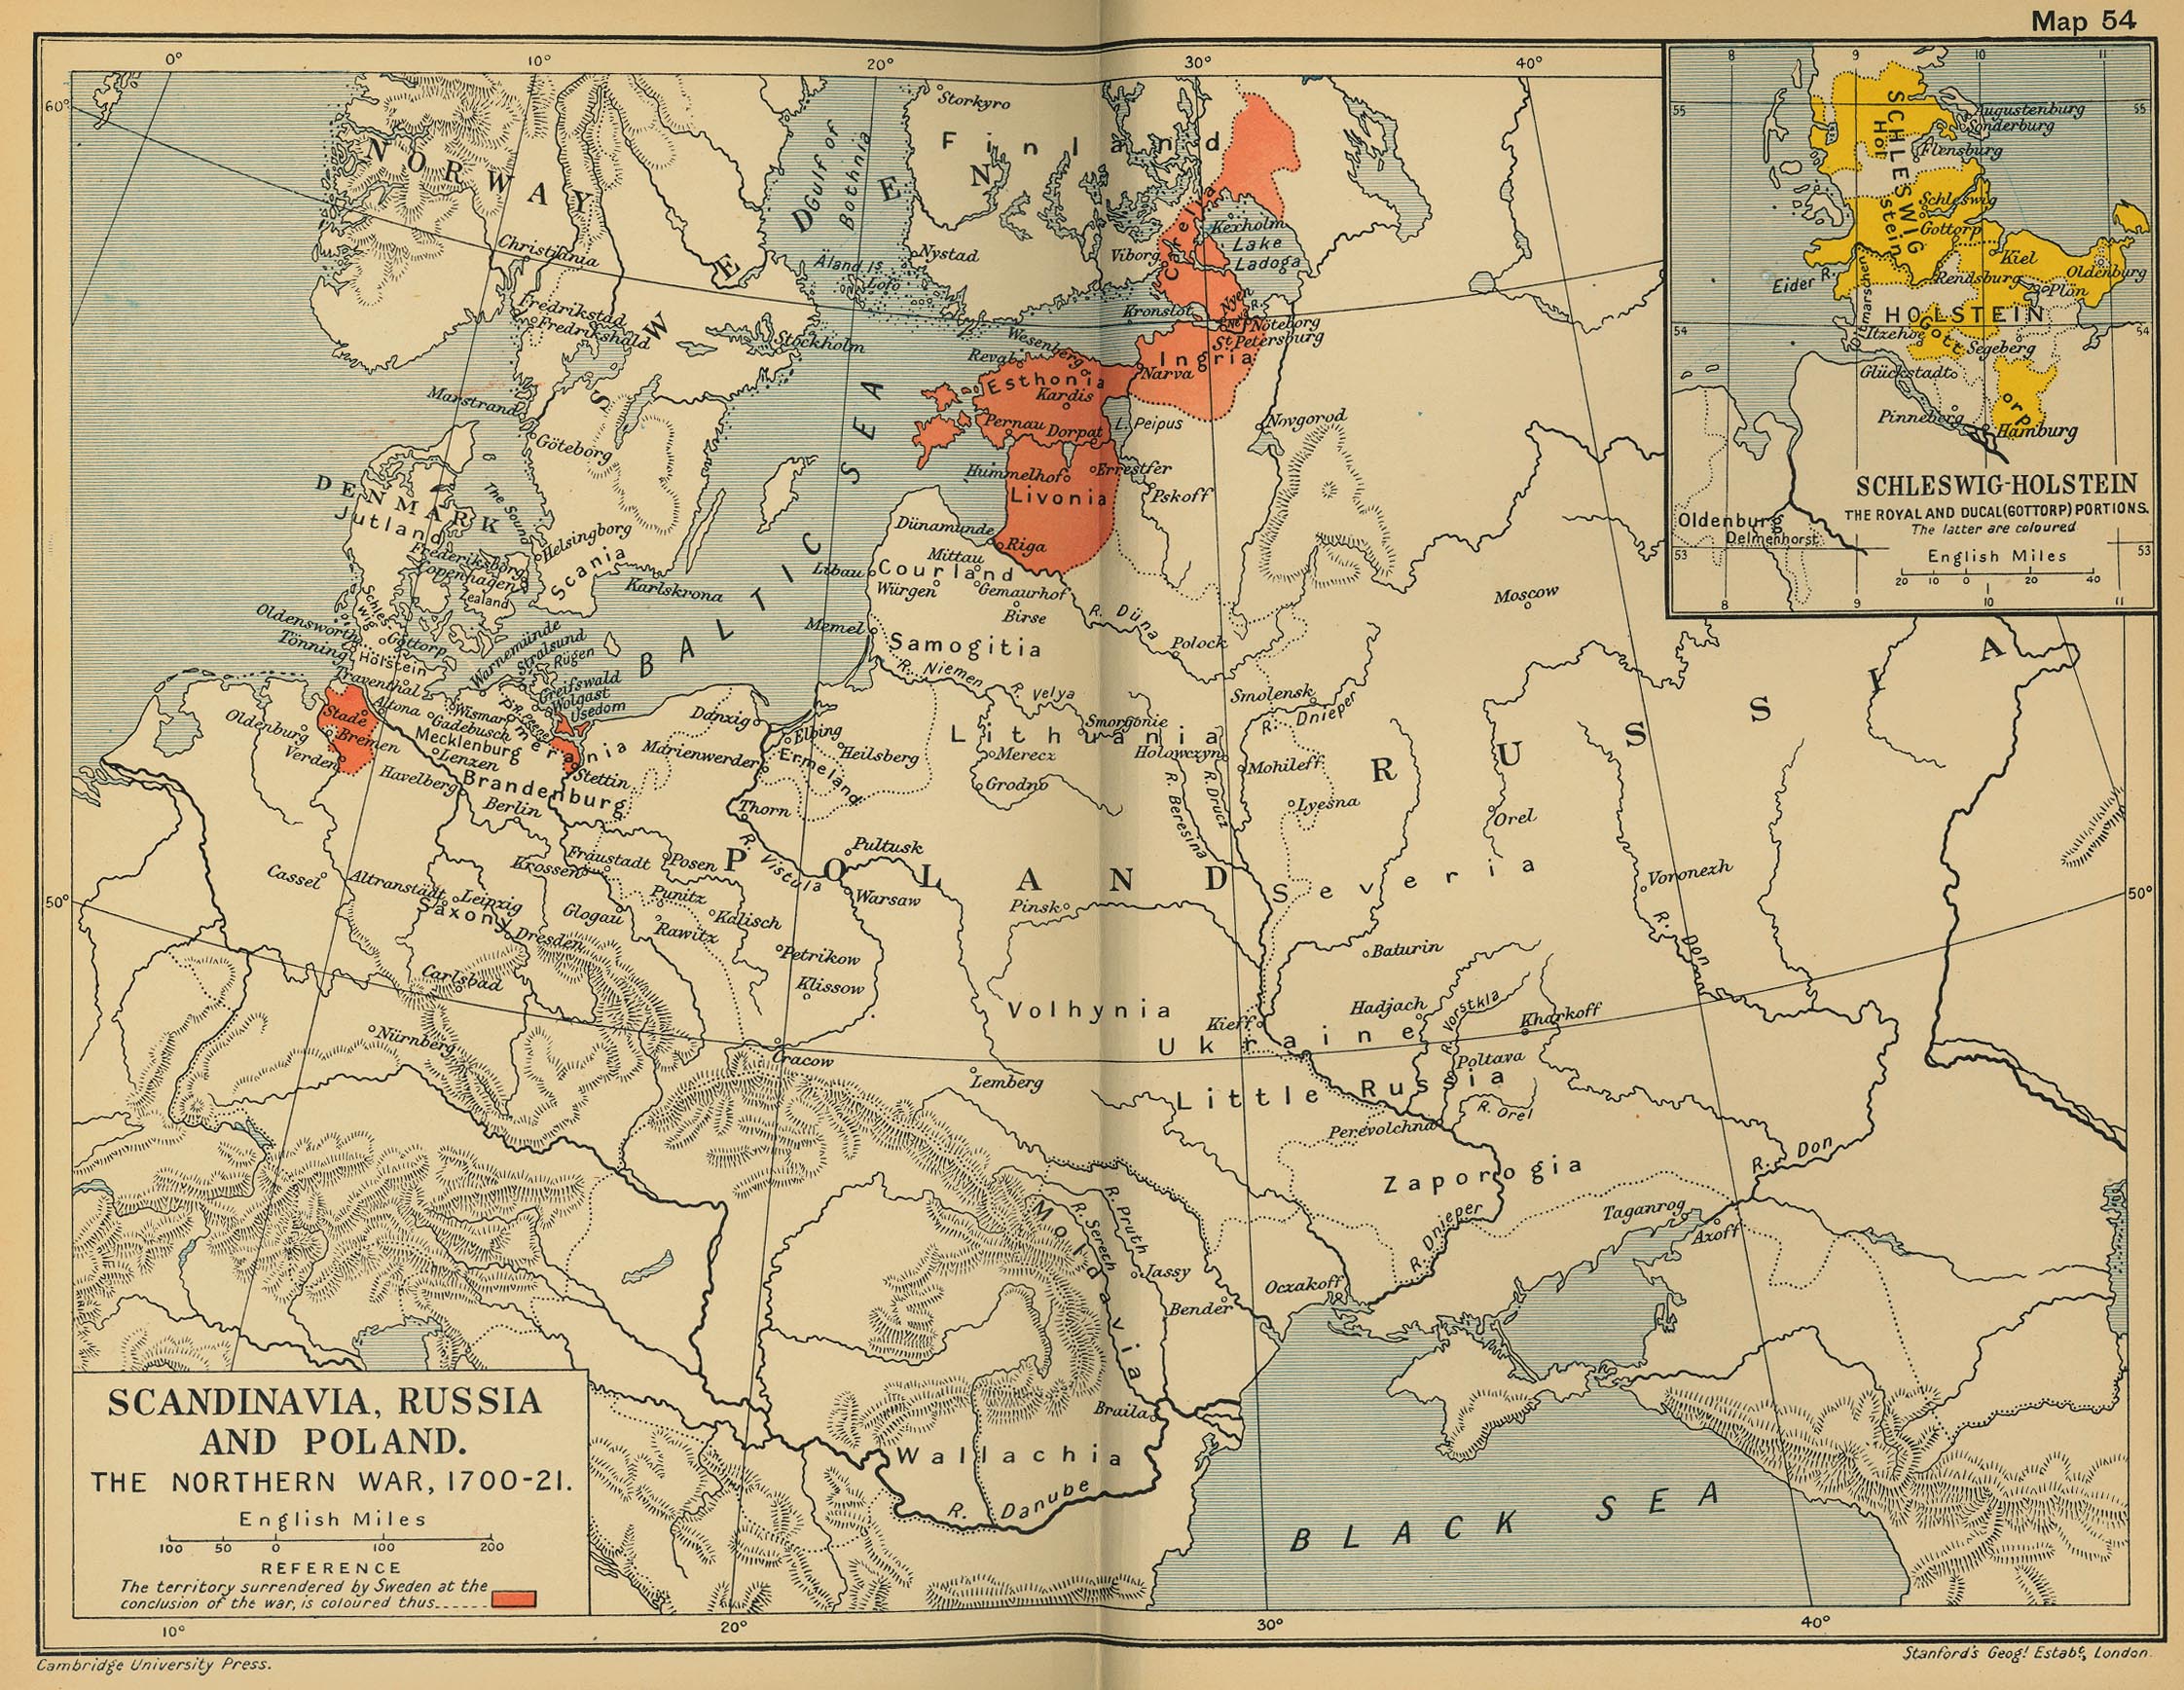 ap of Scandinavia, Russia and Poland: The Northern War, 1700-1721